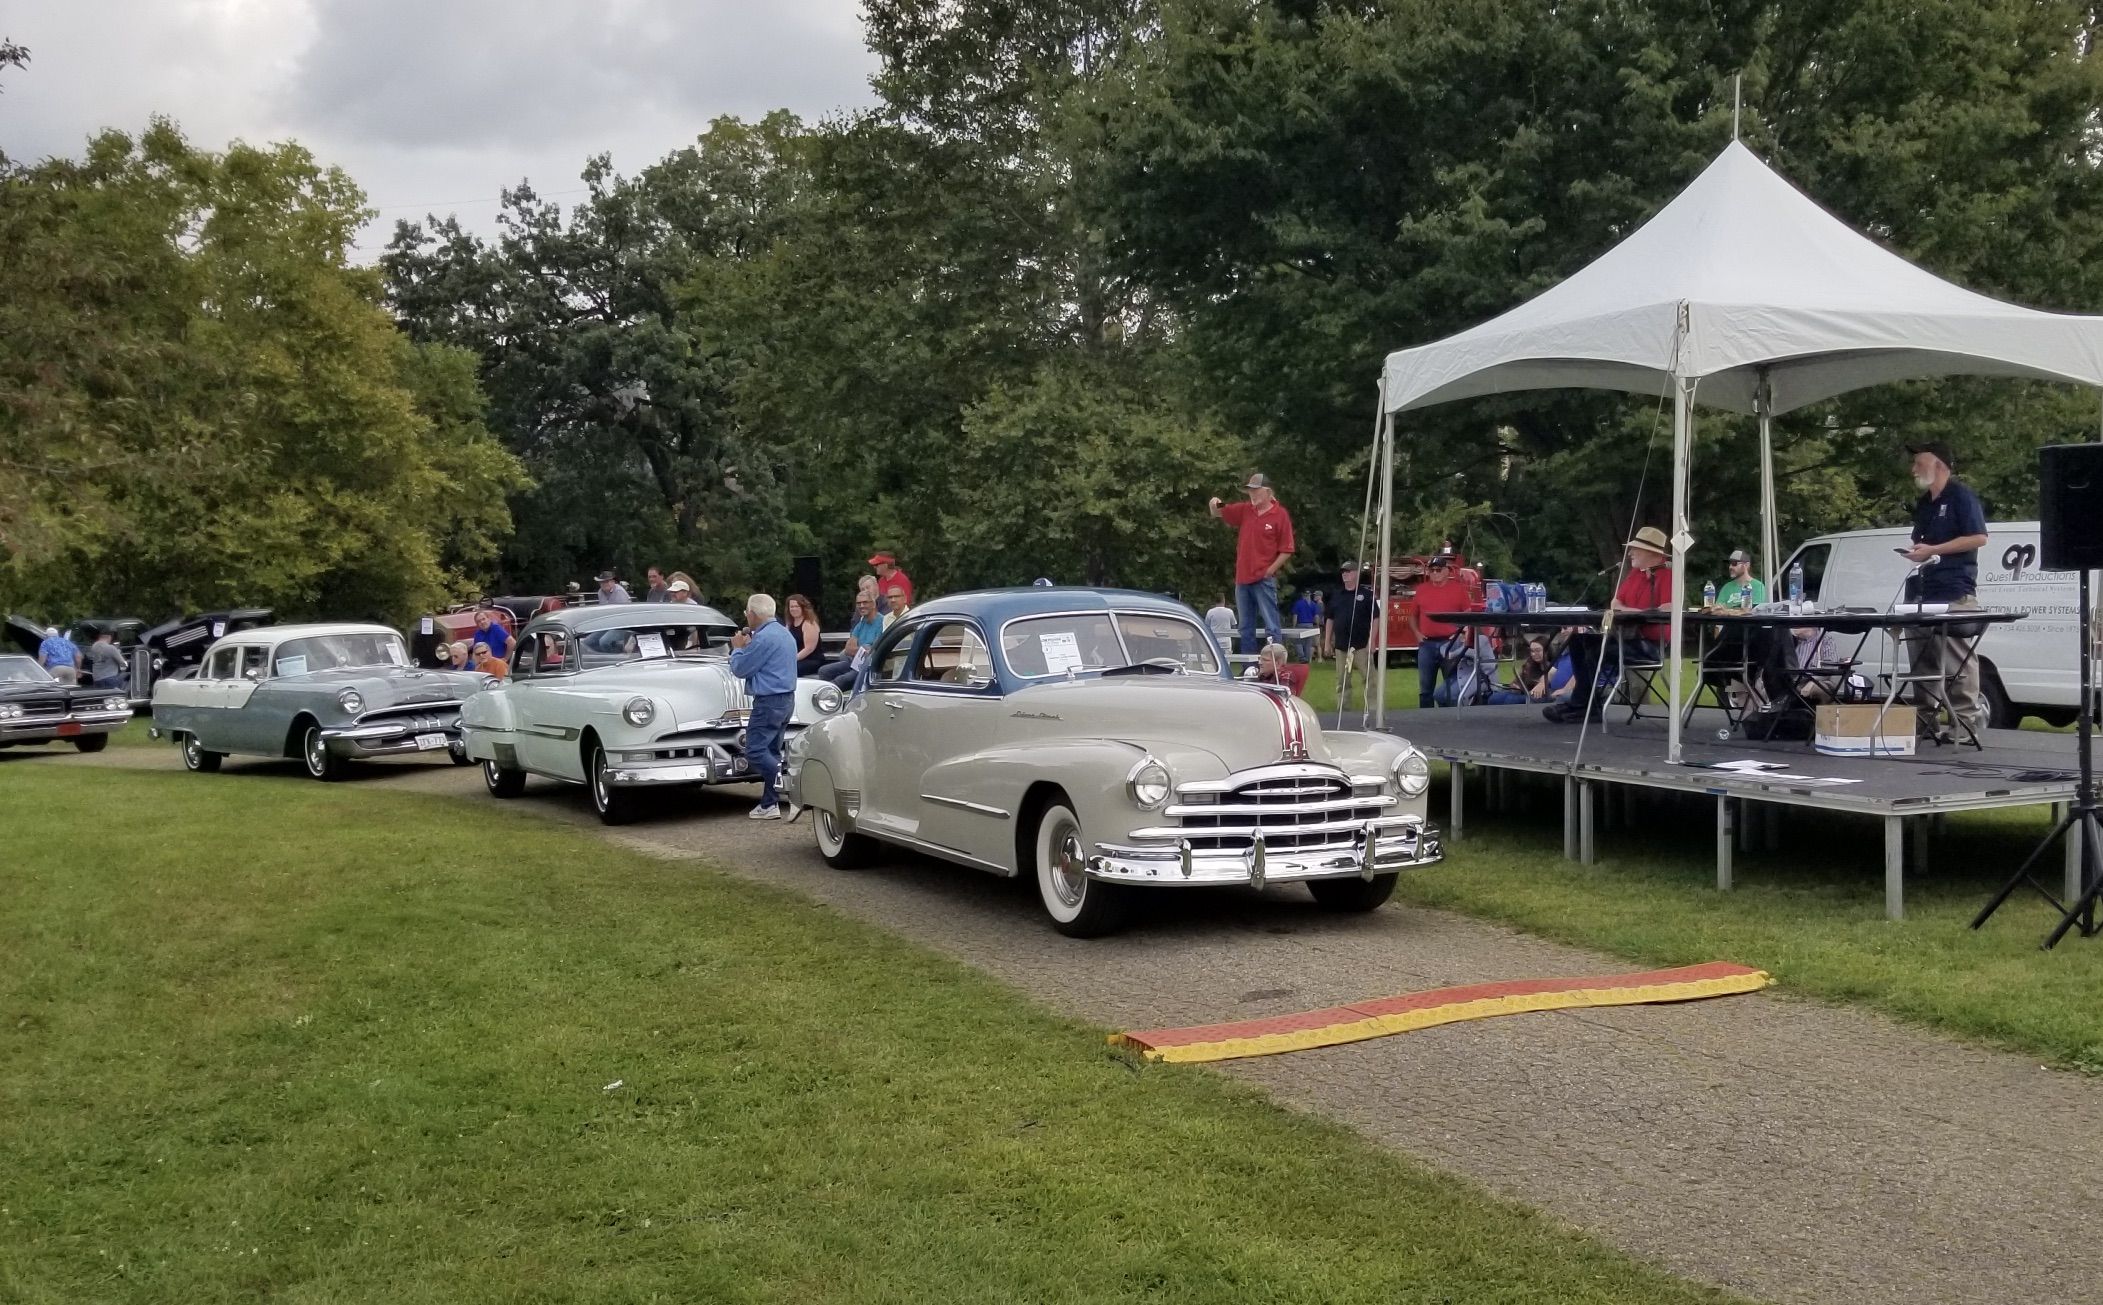 2023 Orphan Car Show Celebrates Forlorn Models and Brands